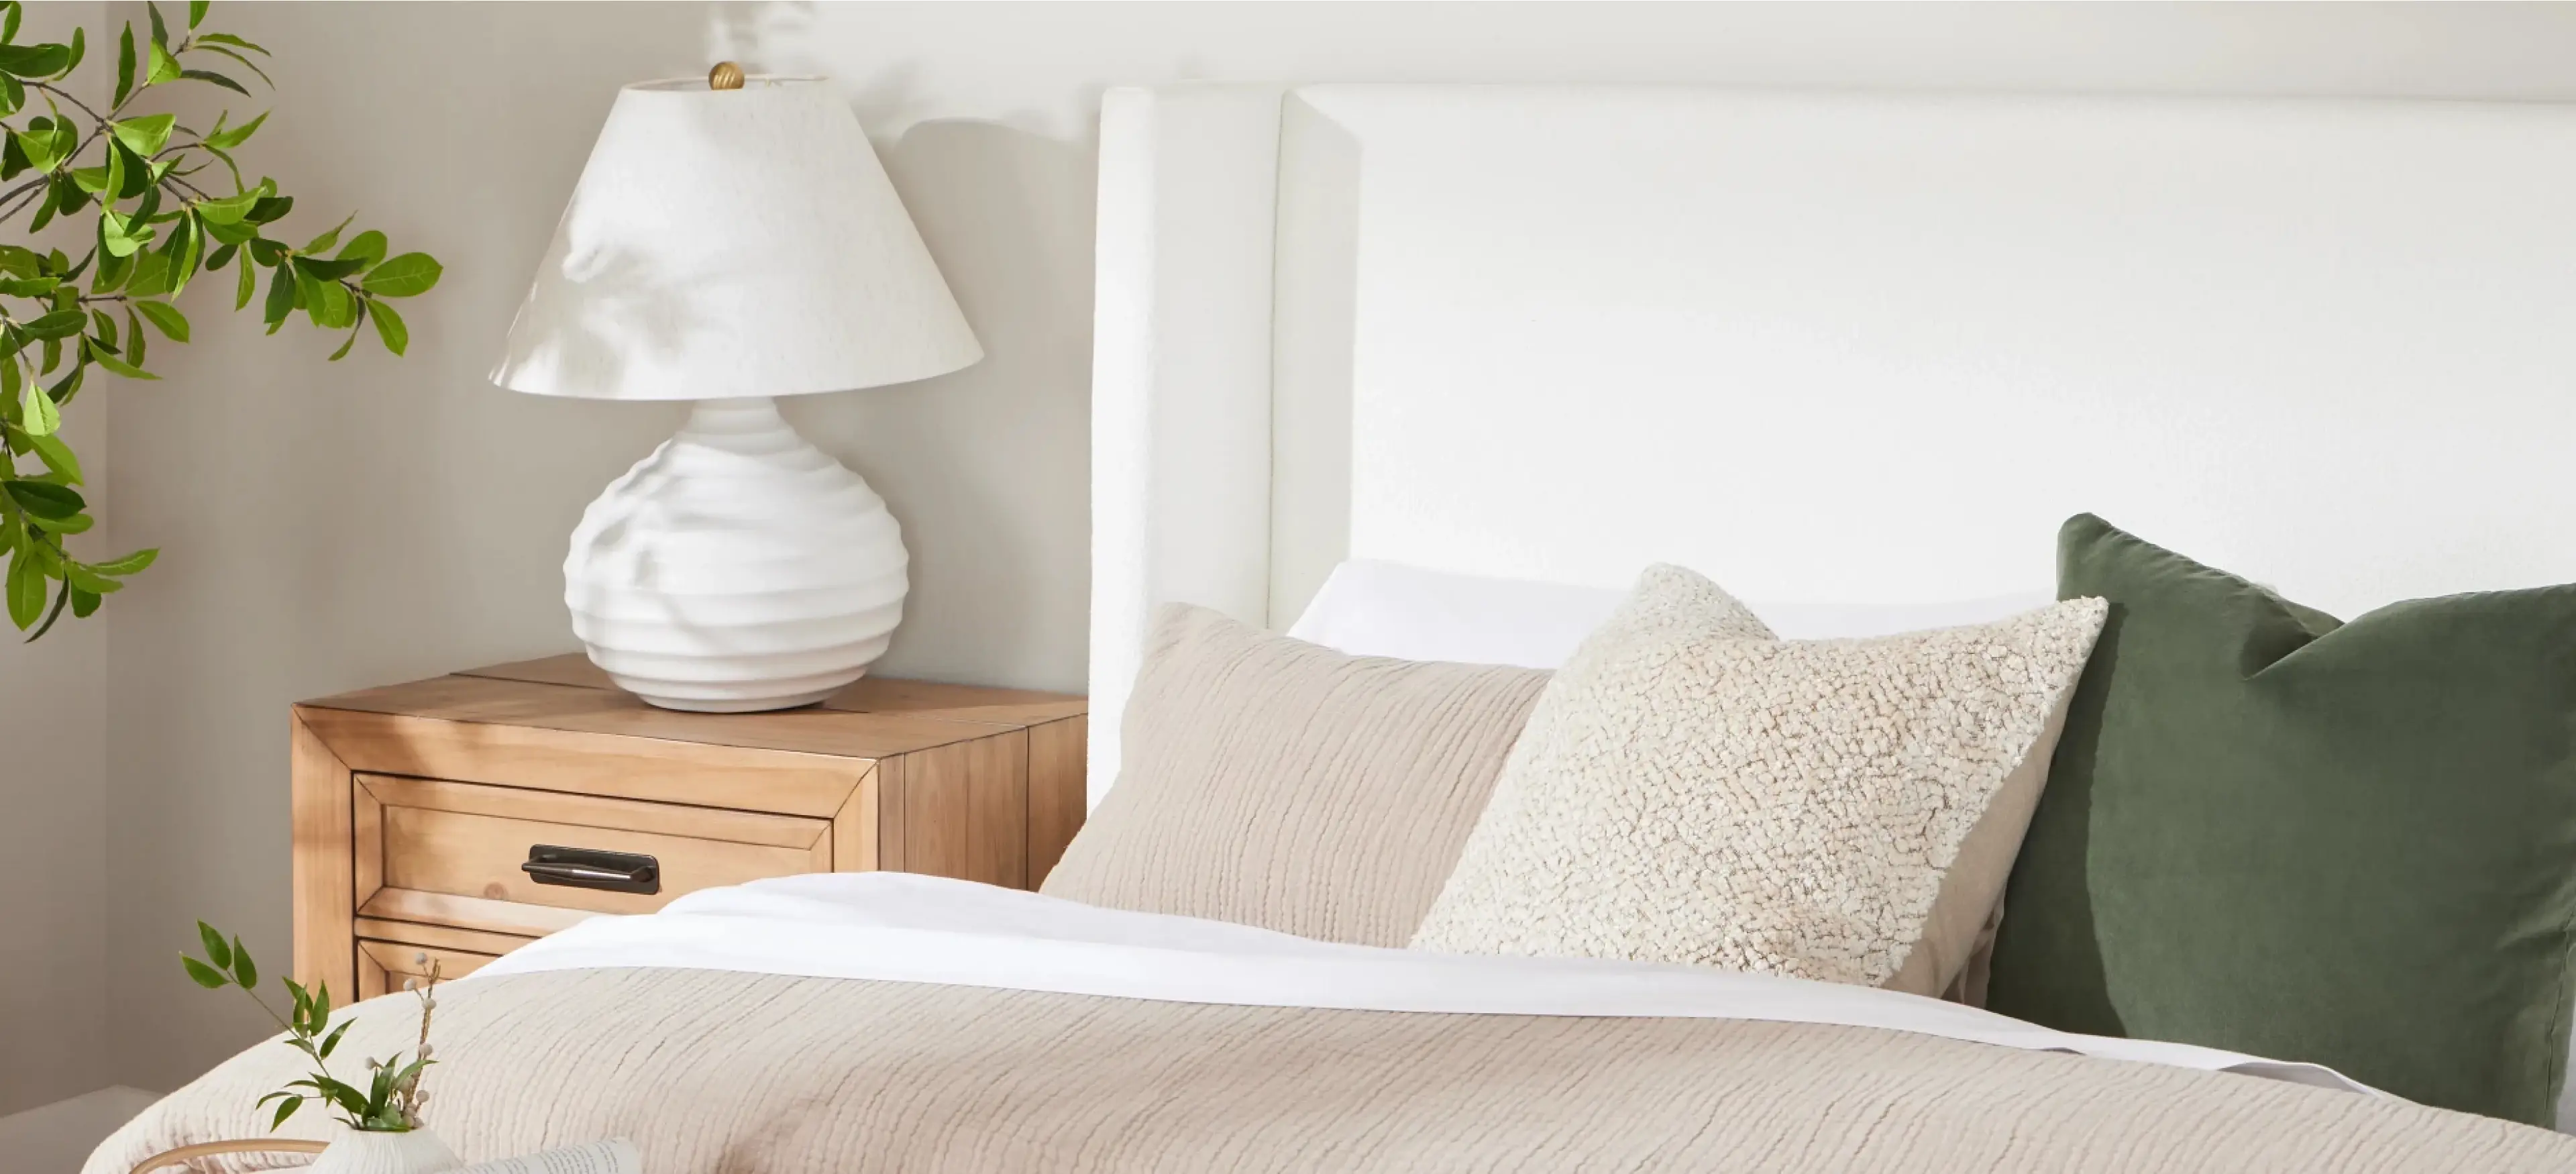 Creating a Warm and Welcoming Space: Essentials for A Guest Room